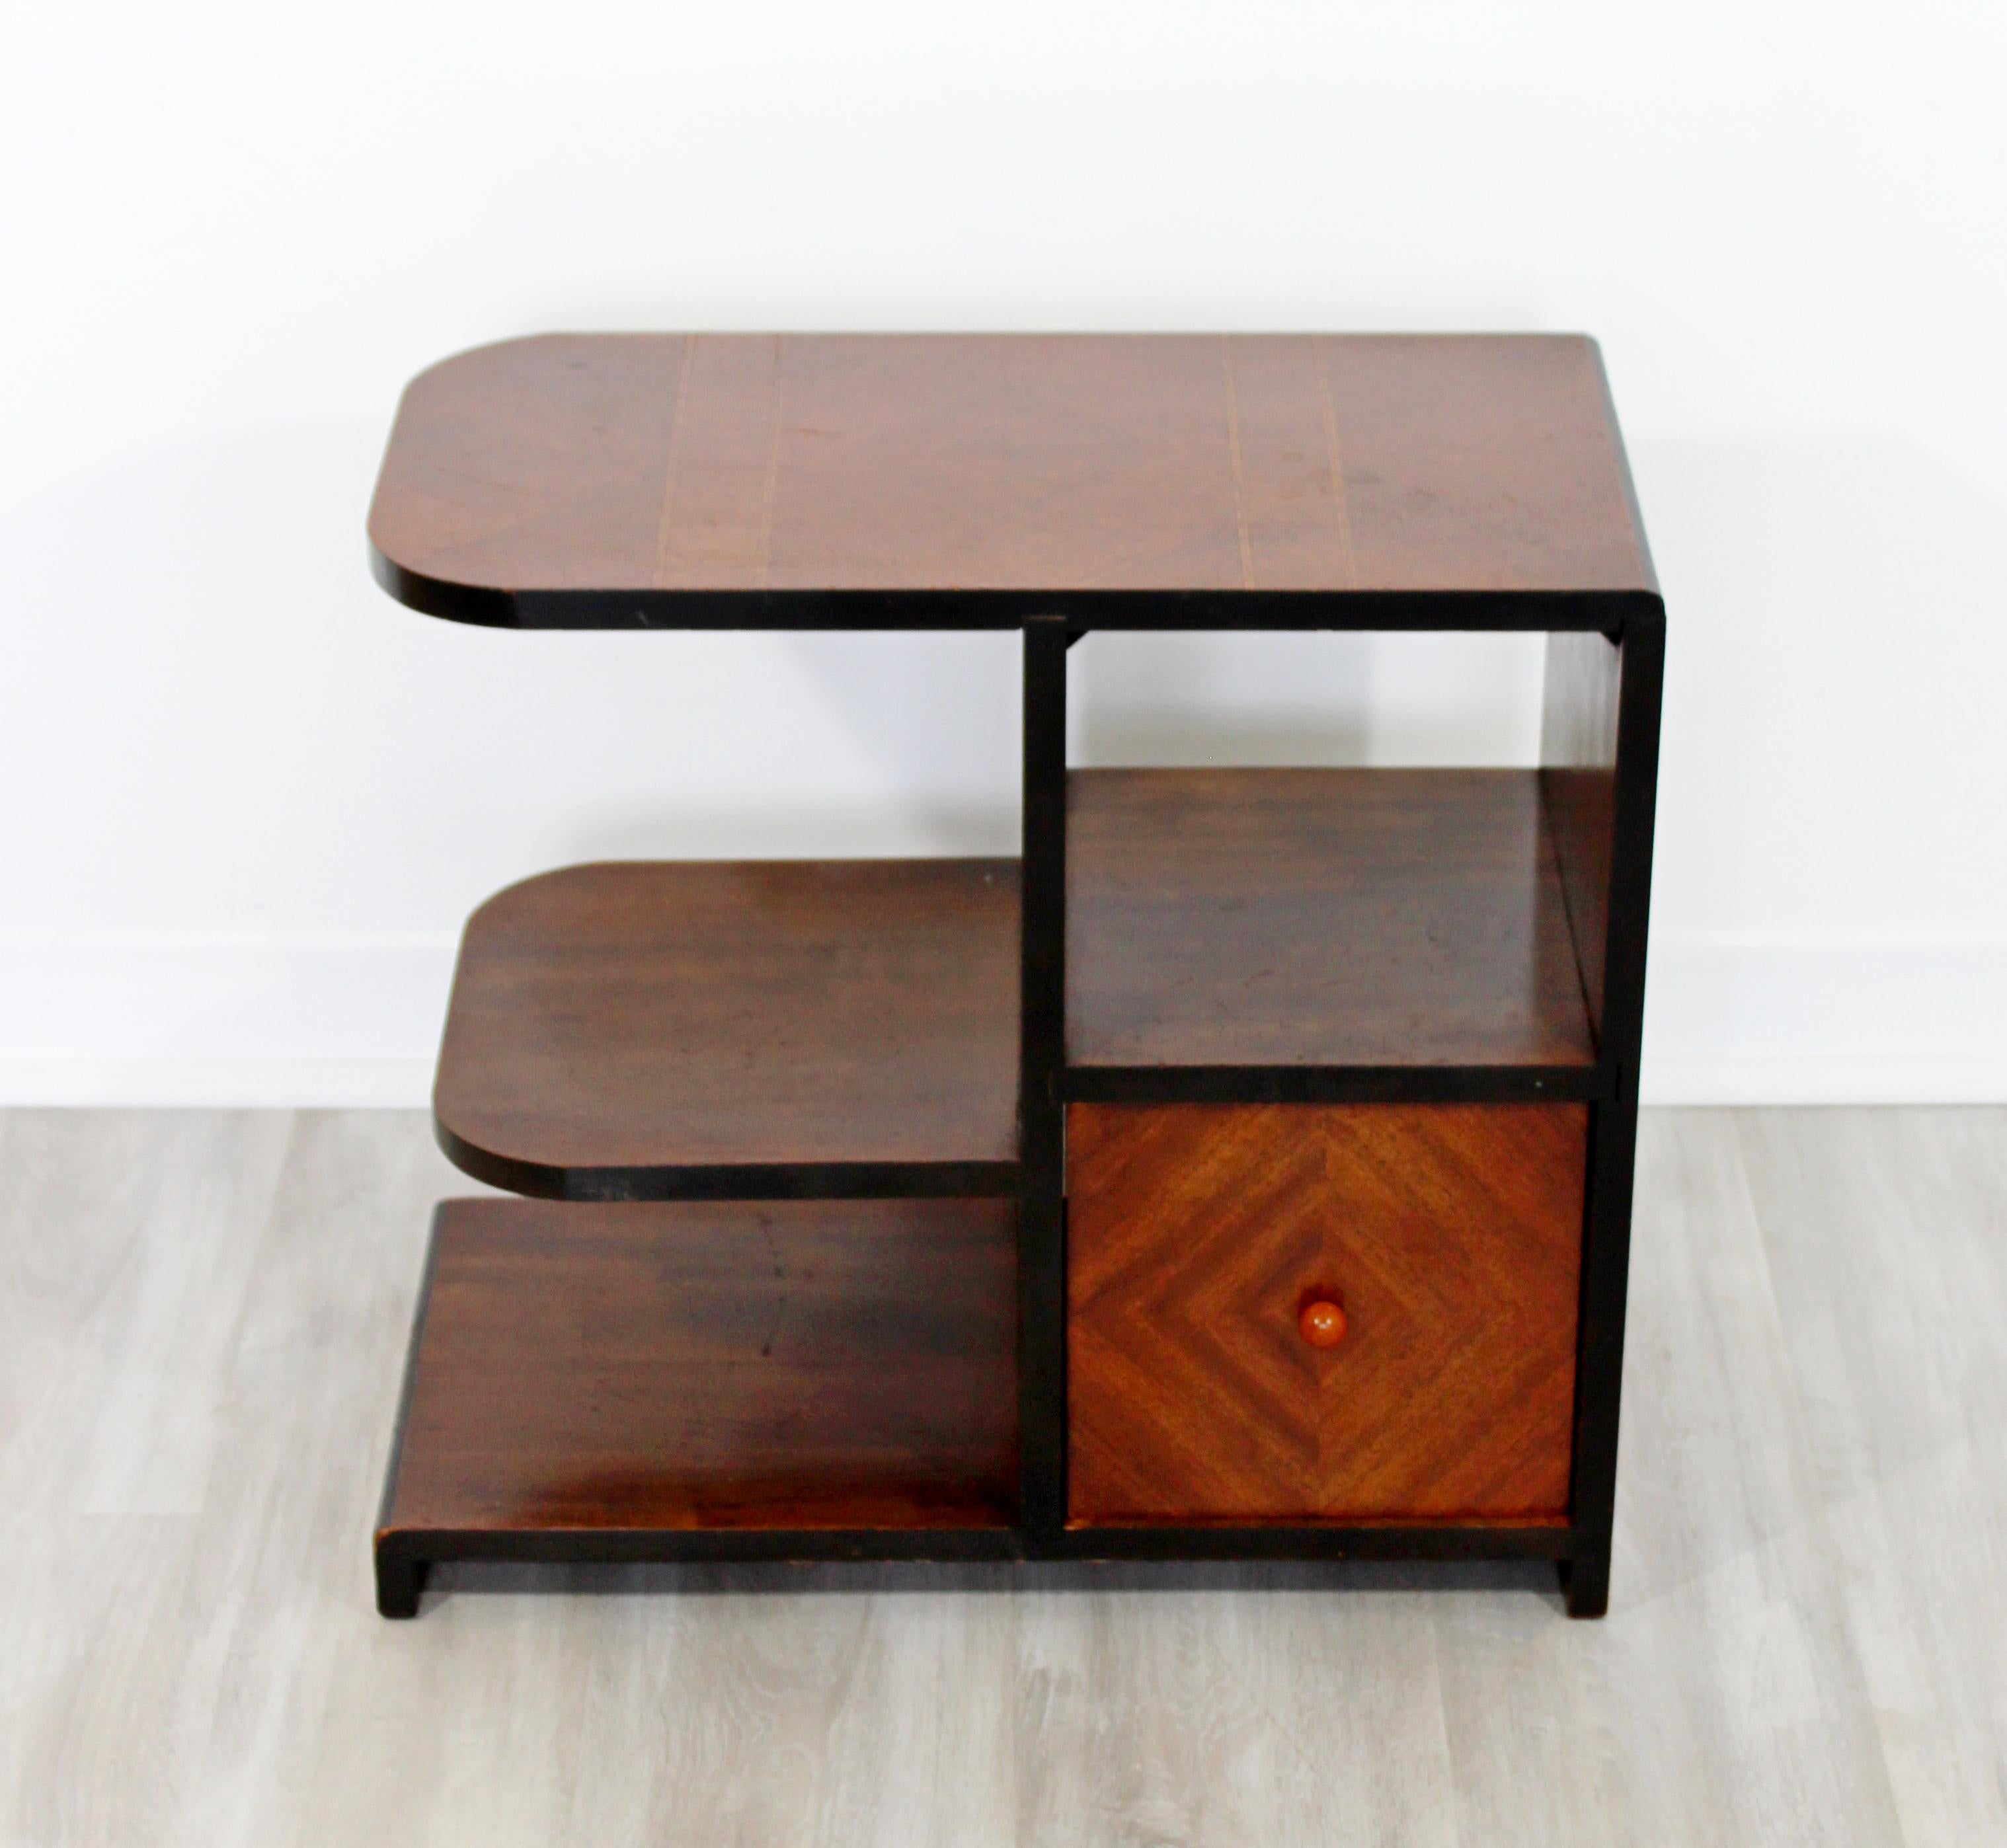 For your consideration is a fantastic mahogany three tiered side or end table, with a removable drawer, in the style of Donald Desky, Gilbert Rohde or Paul Frankl. In very good condition. The dimensions are 21.5